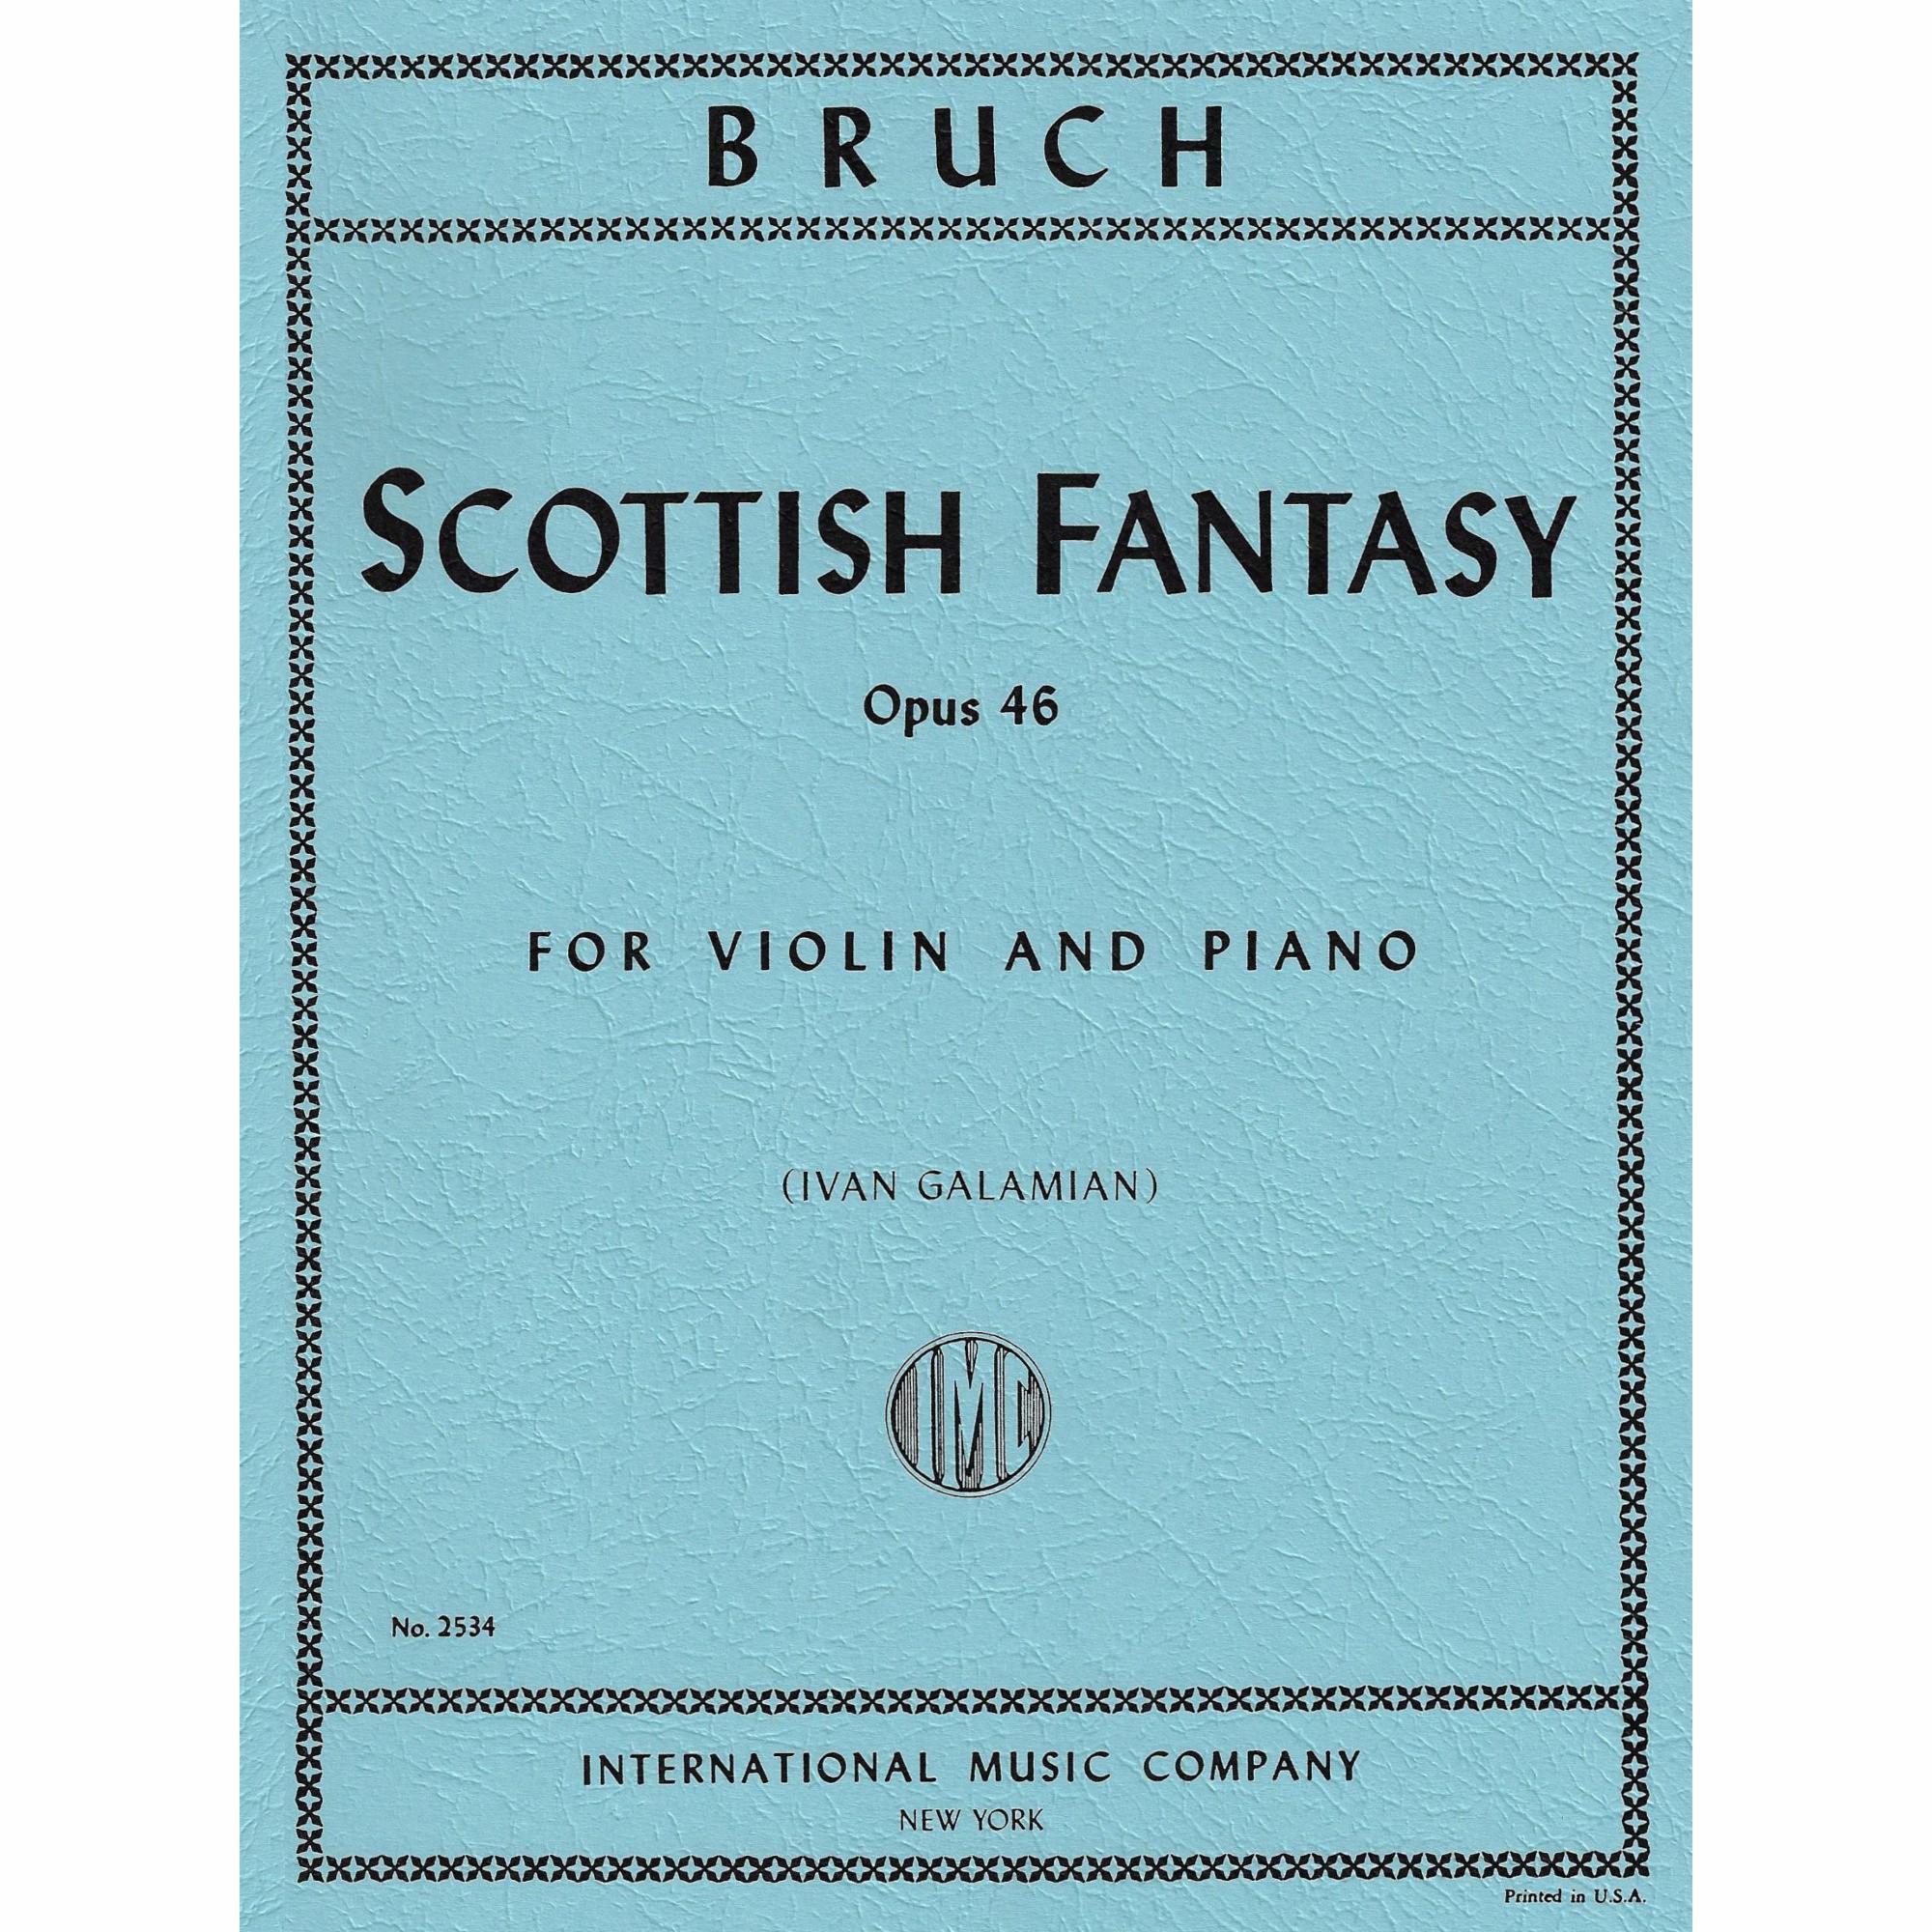 Bruch -- Scottish Fantasy, Op. 46 for Violin and Piano